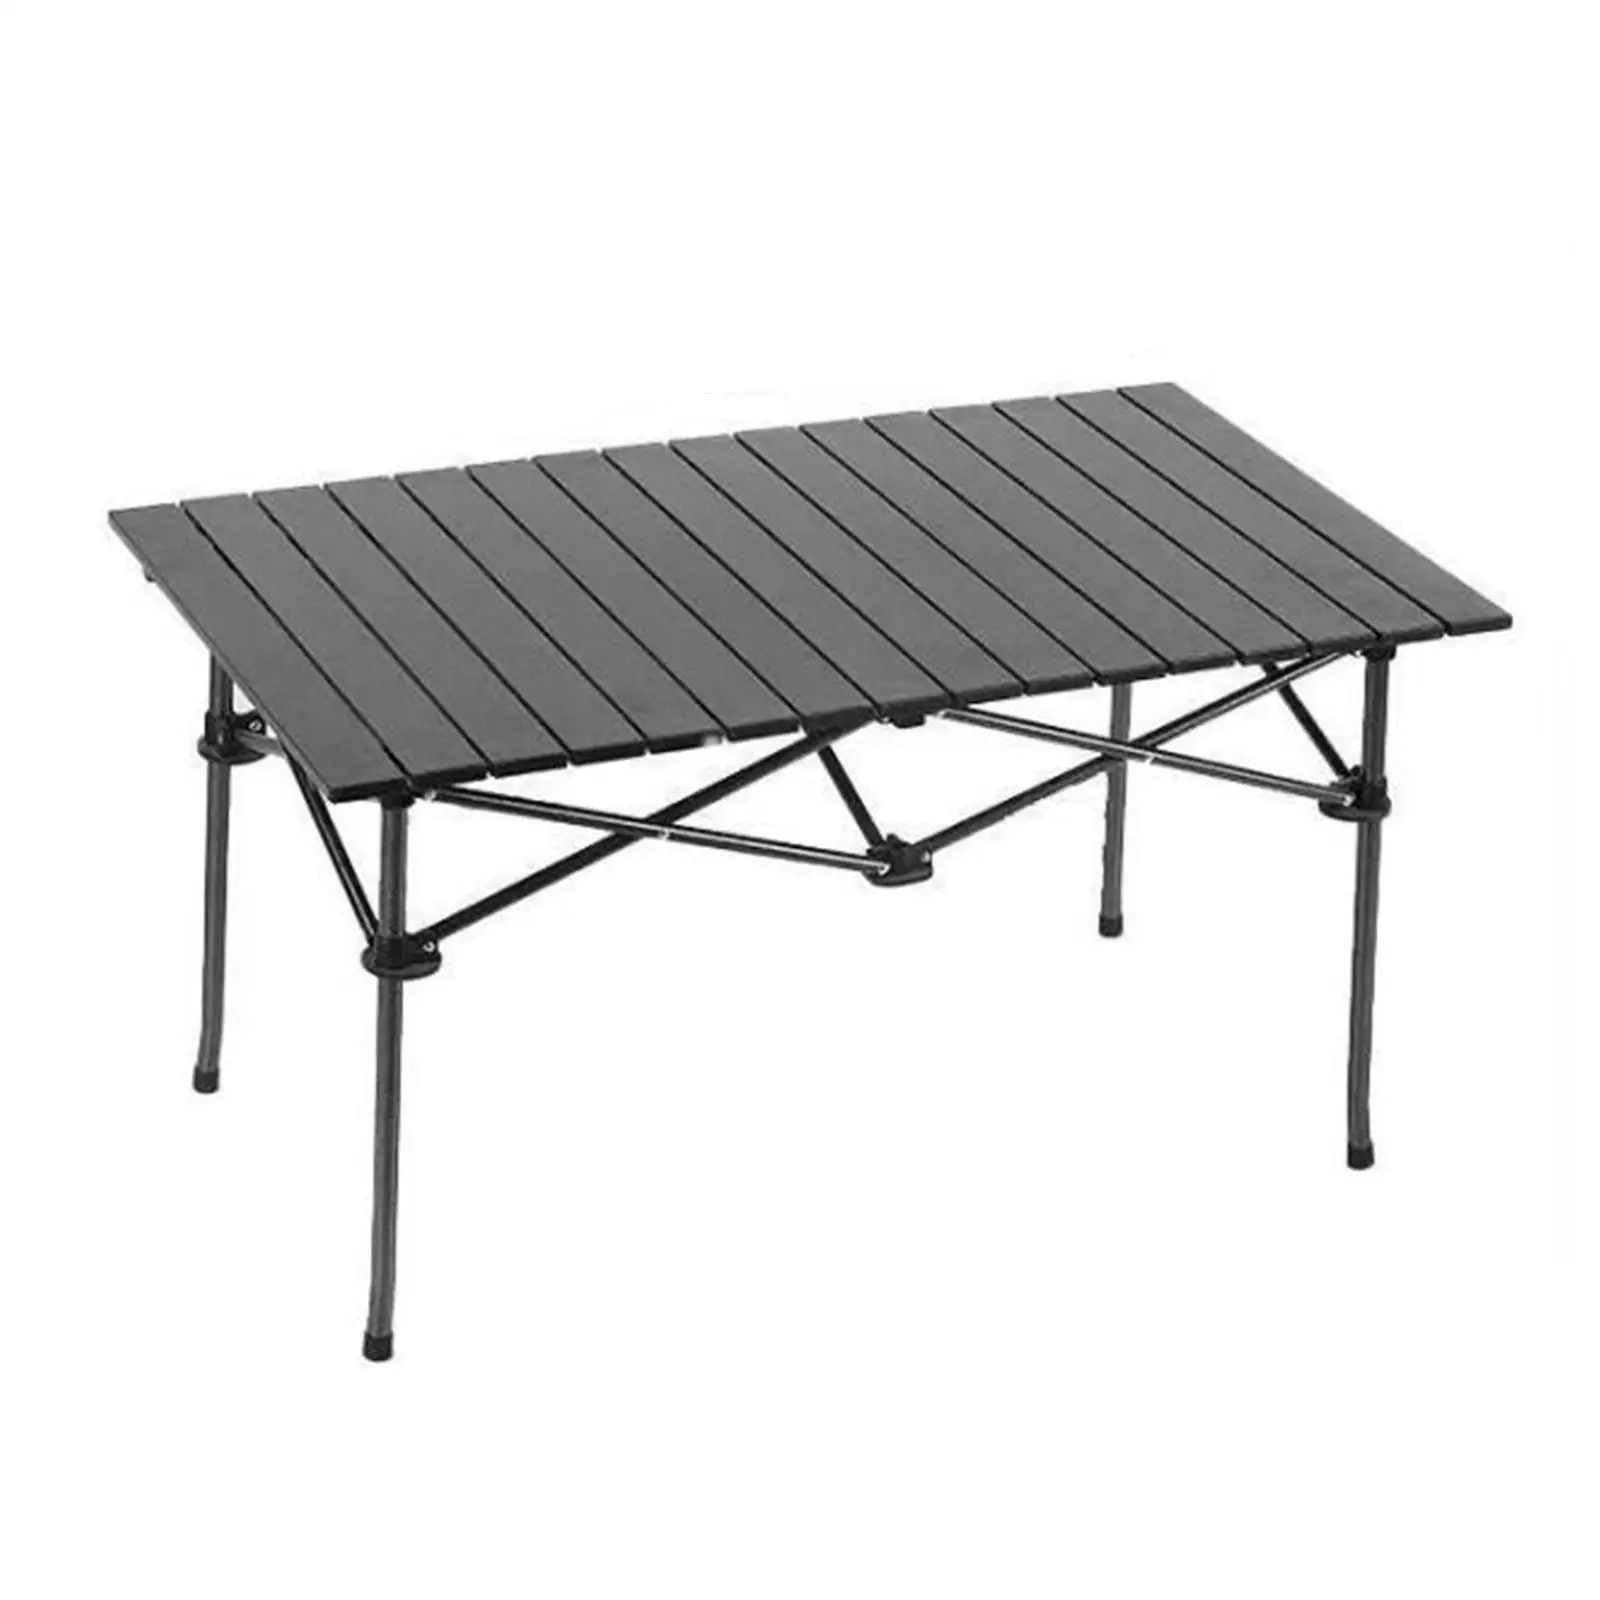 Folding Table Board Aluminum Alloy Accessories Sturdy Good Construction Replacement Durable for Camping Cart Garden Barbecue